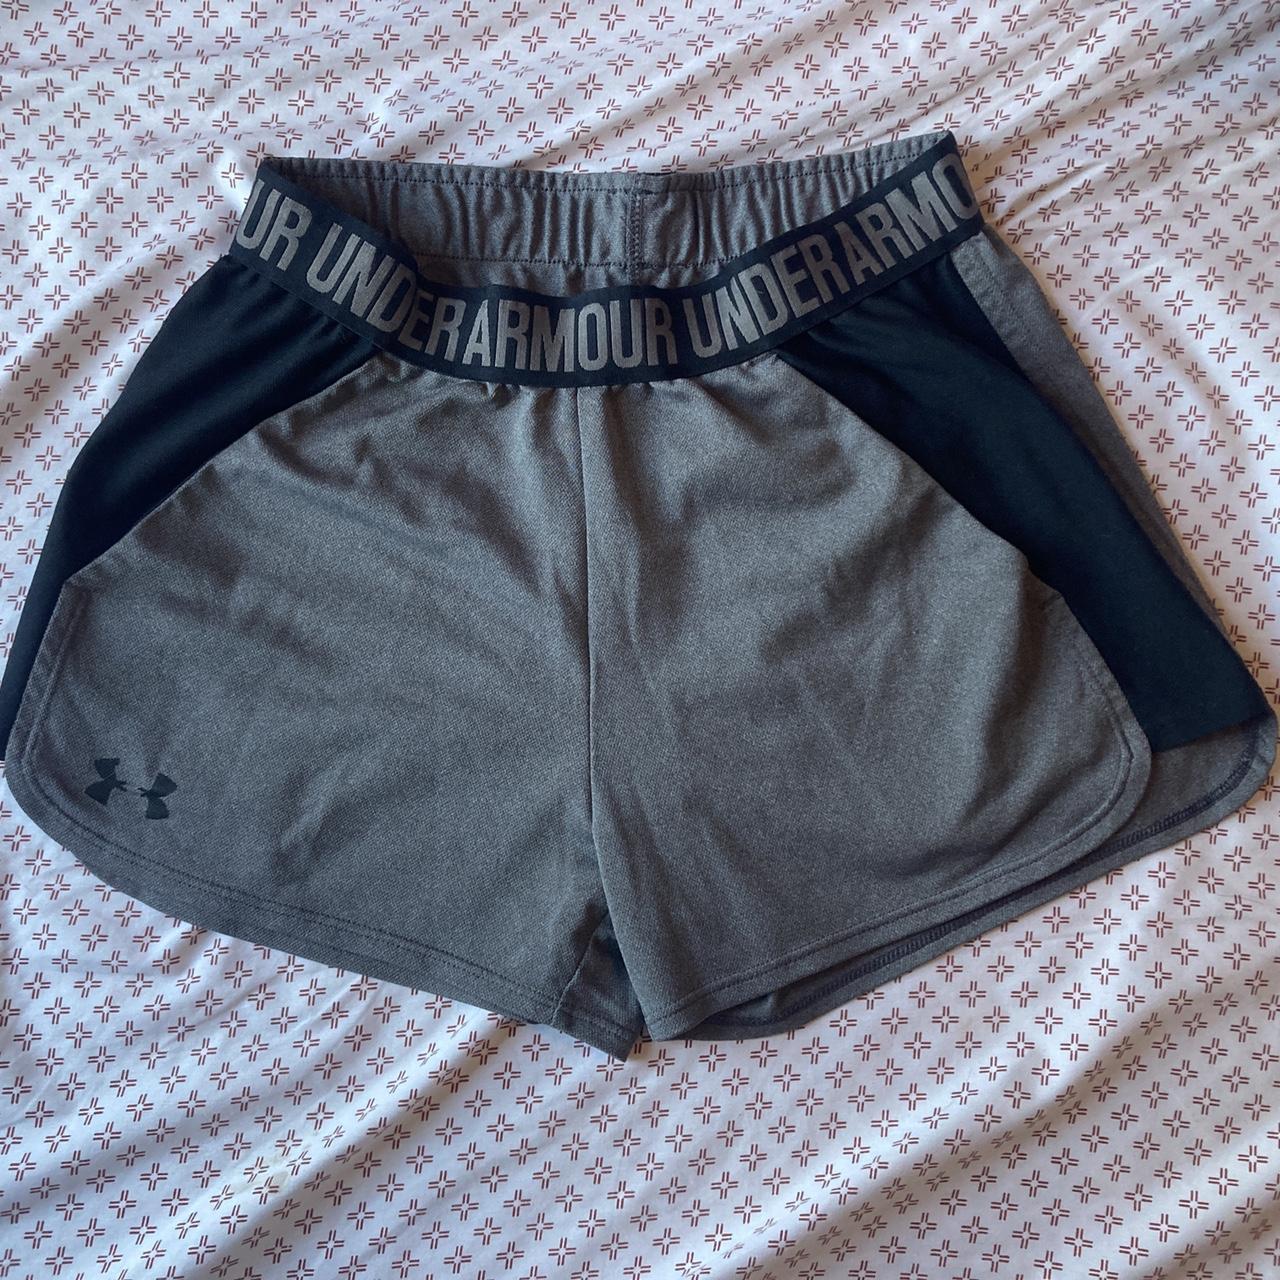 extra small Under Armour athletic shorts - Depop